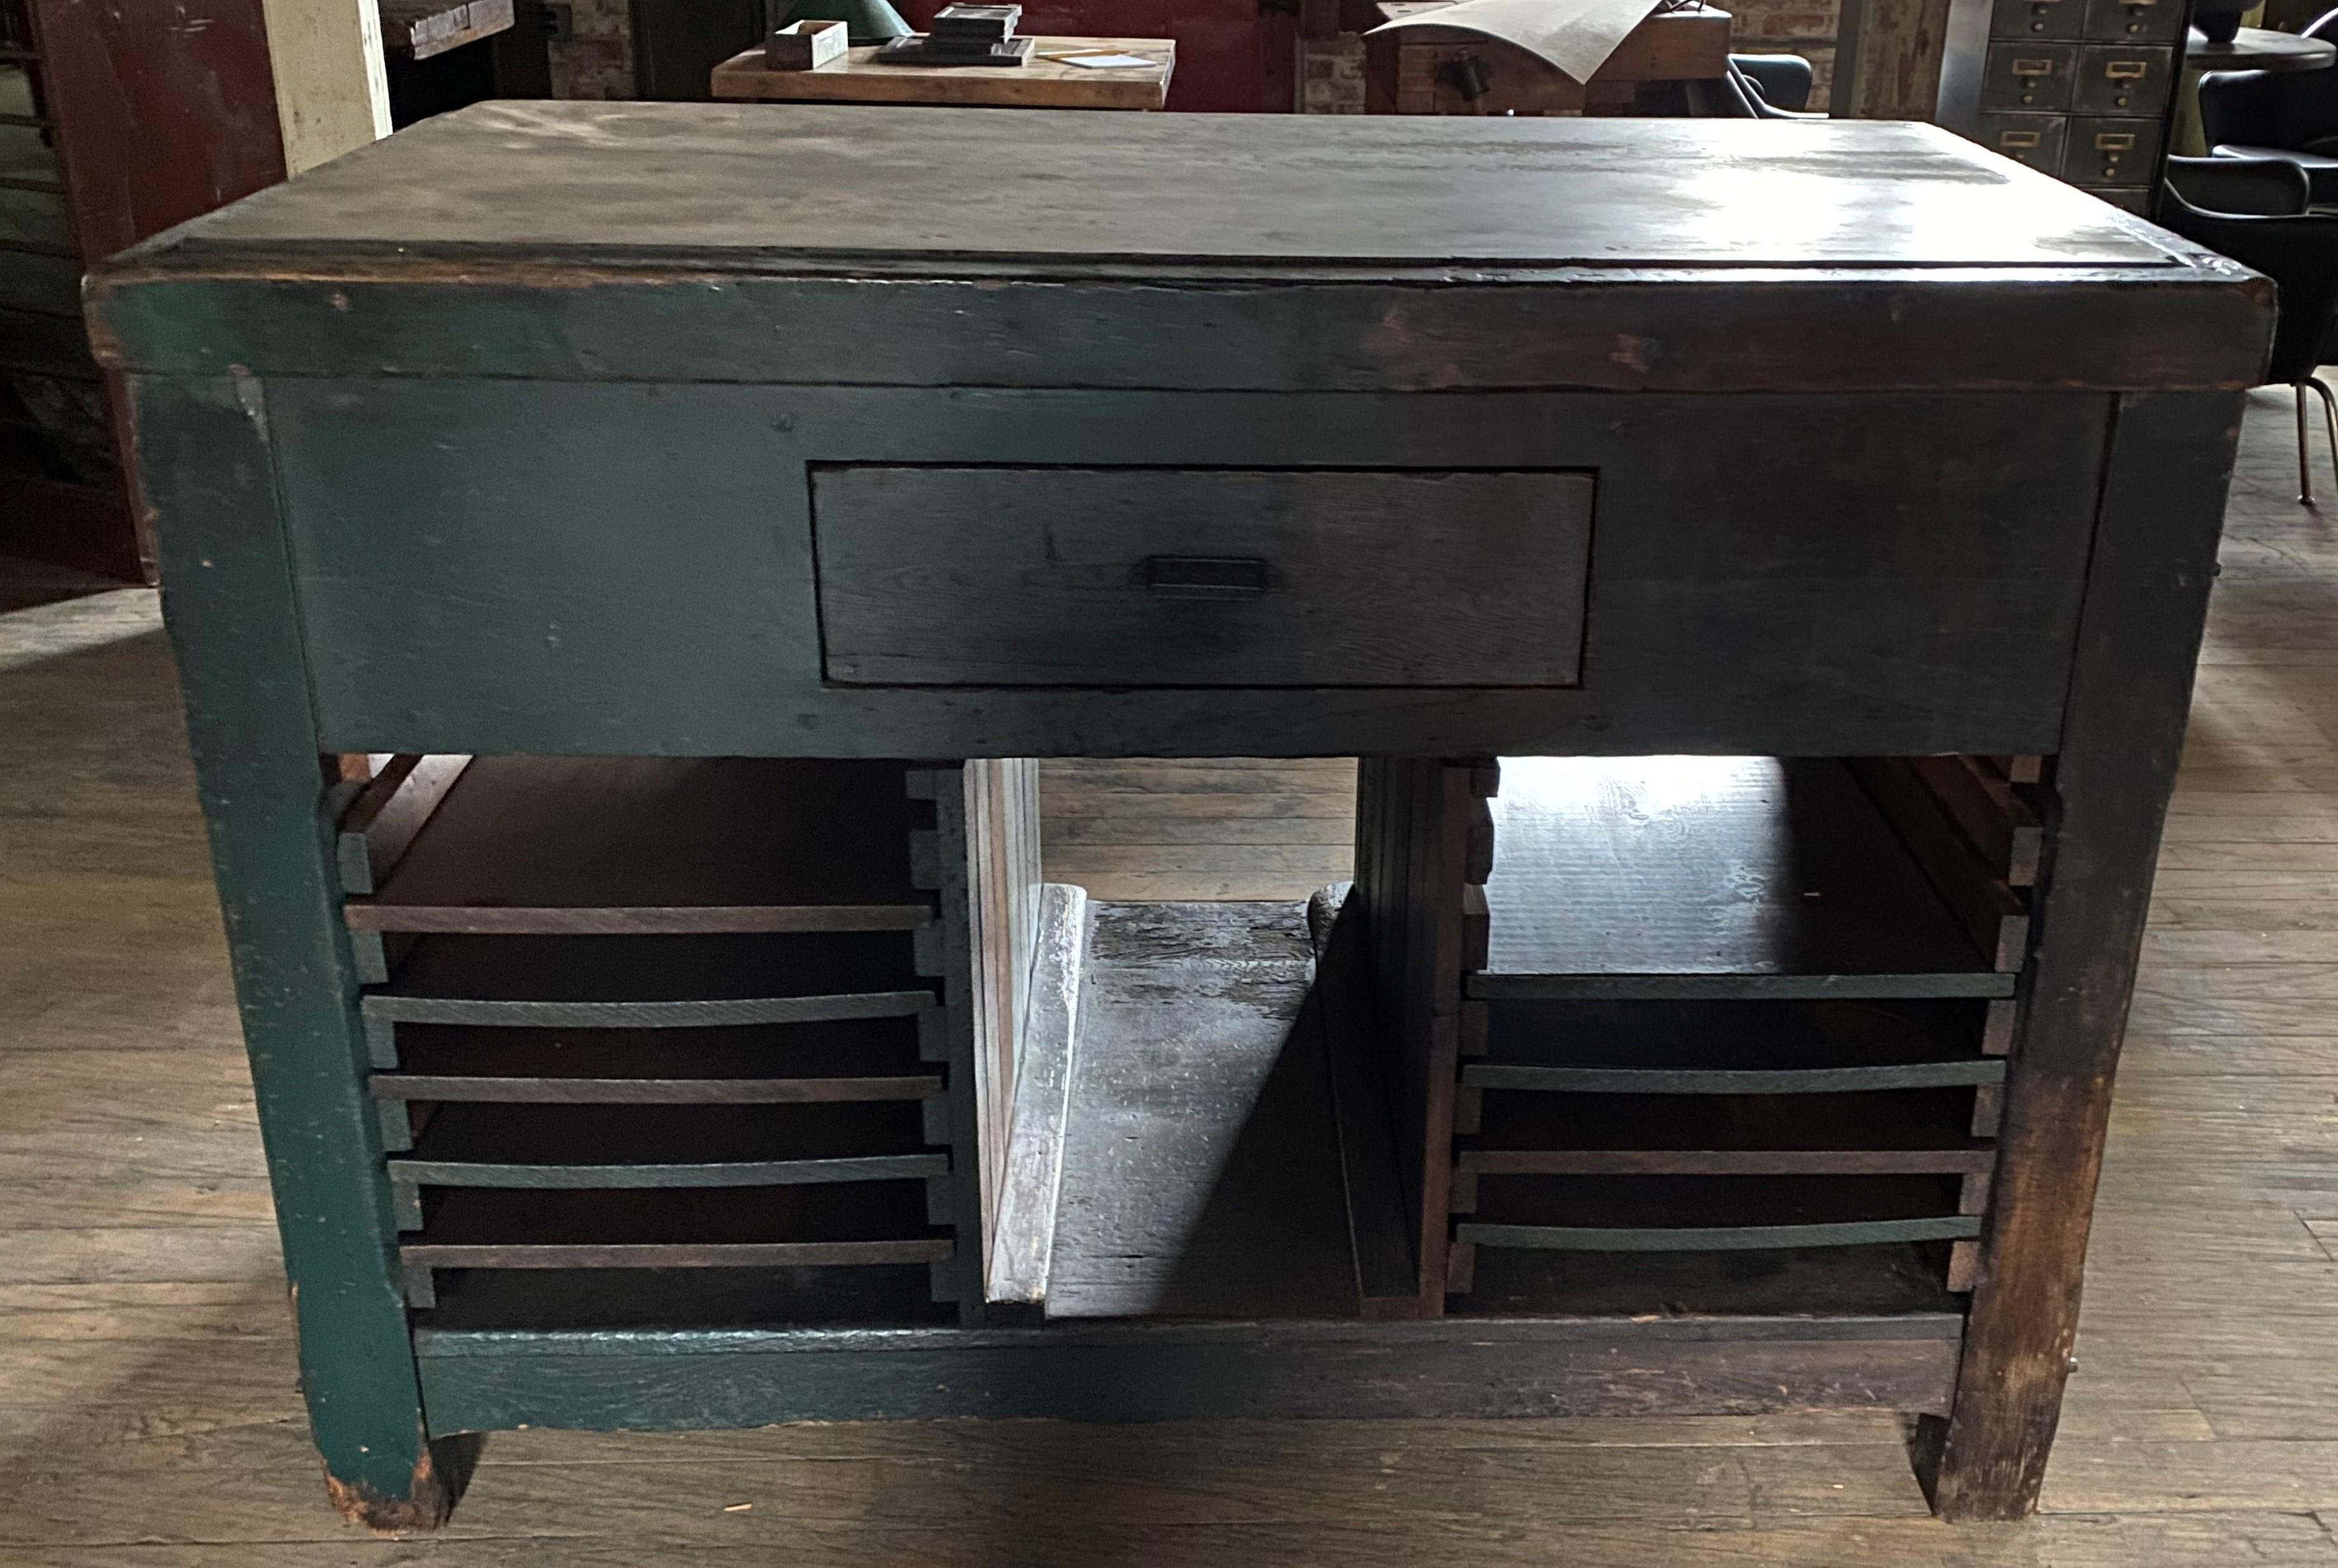 Antique Hamilton Printer's work table or cabinet
Overall dimensions - 31